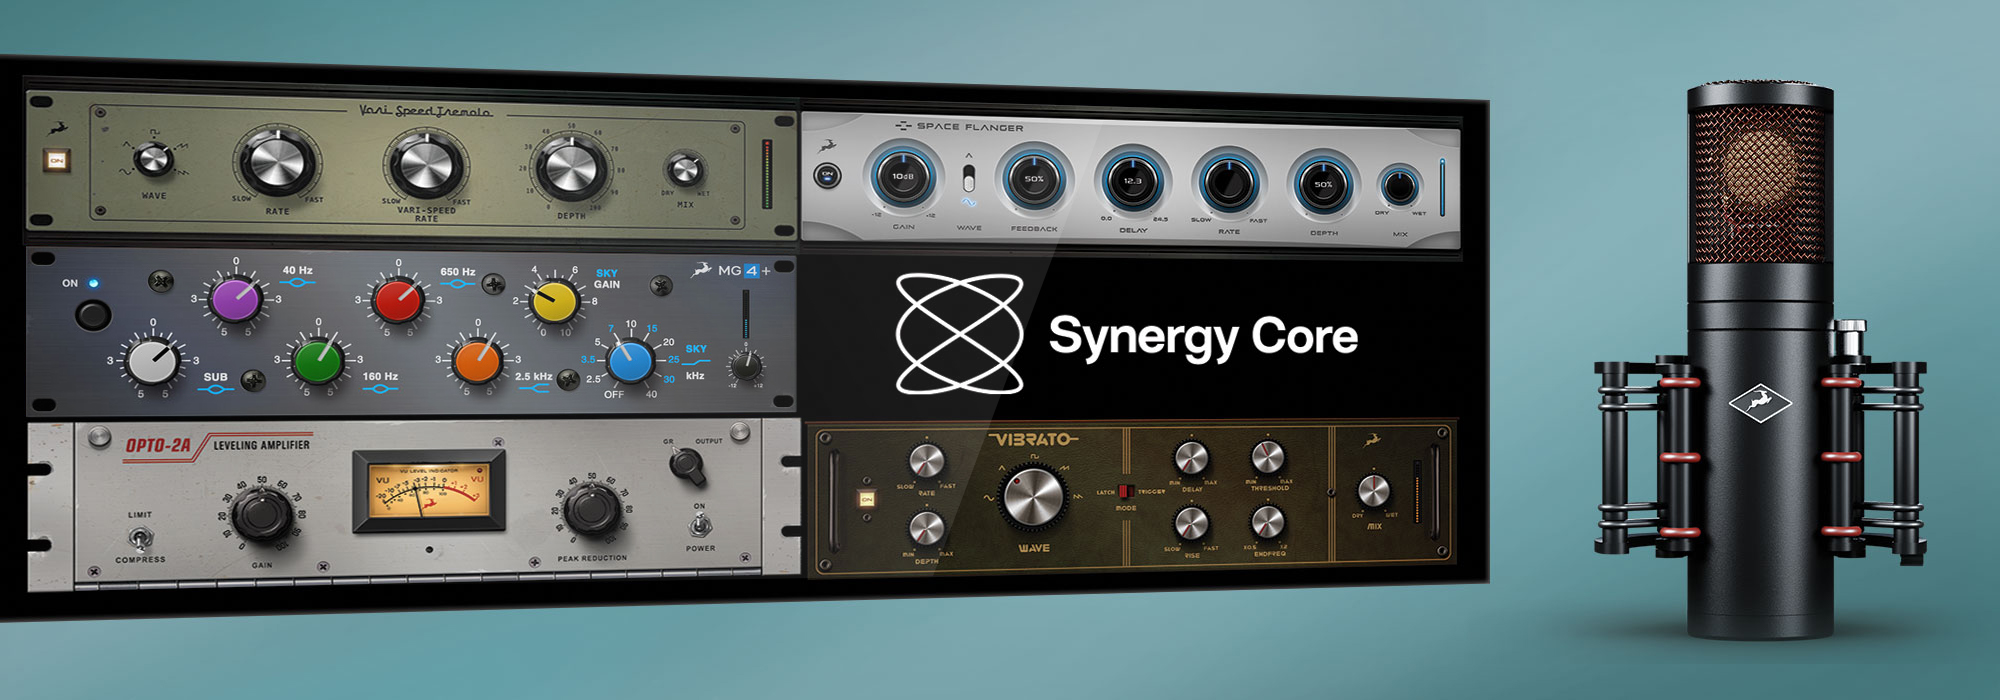 Edge Go Joins the Synergy Core Line-up with the Added Fire Power of 5 New Vocal Effects